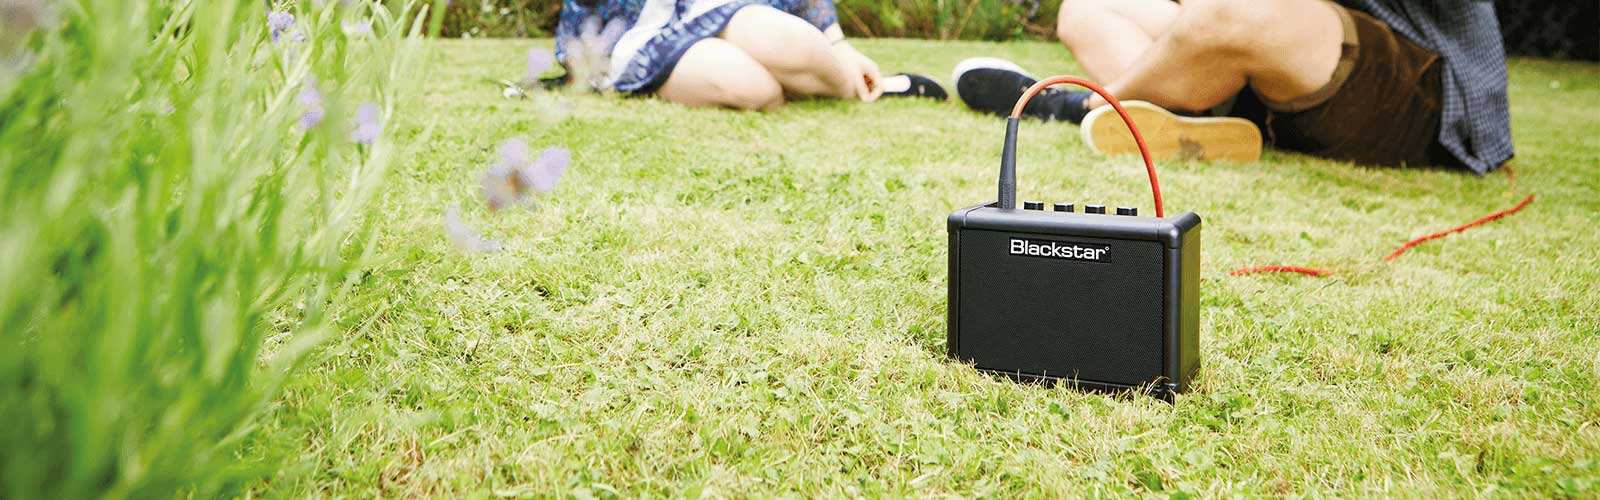 FLY 3 guitar amp outside sitting in grass